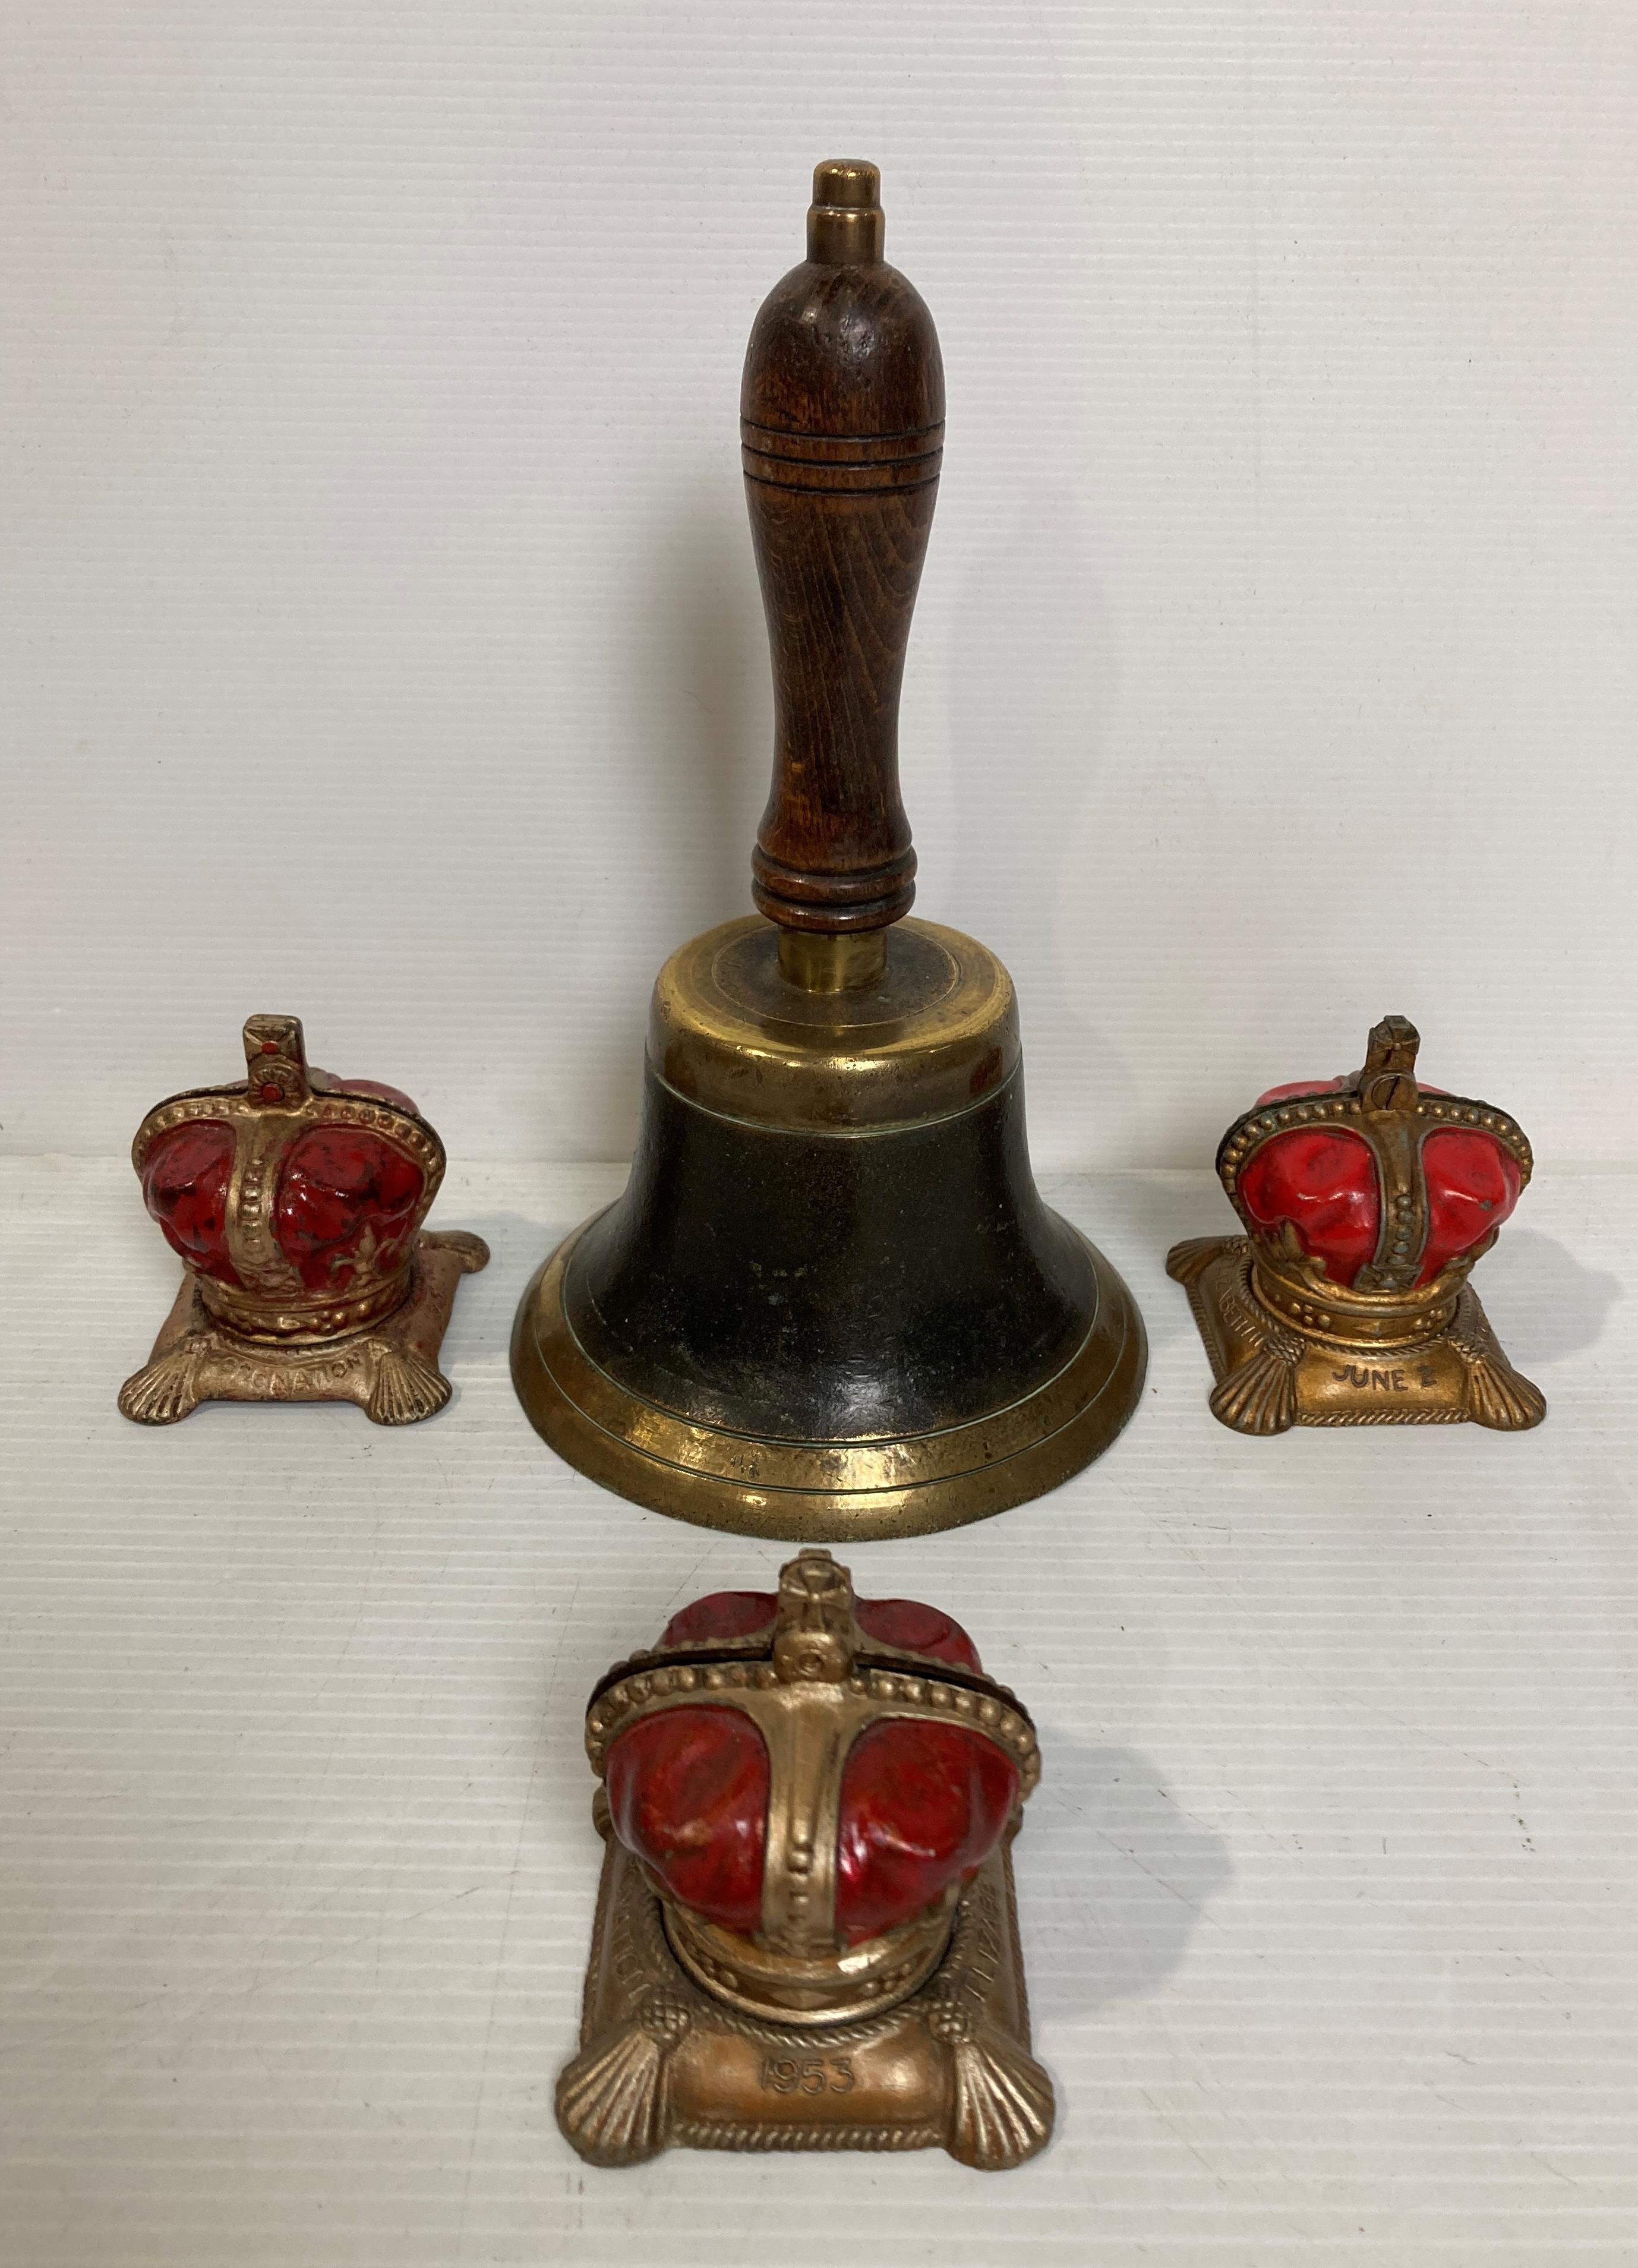 Four items including a vintage brass hand bell and three metal Elizabeth II crown money boxes